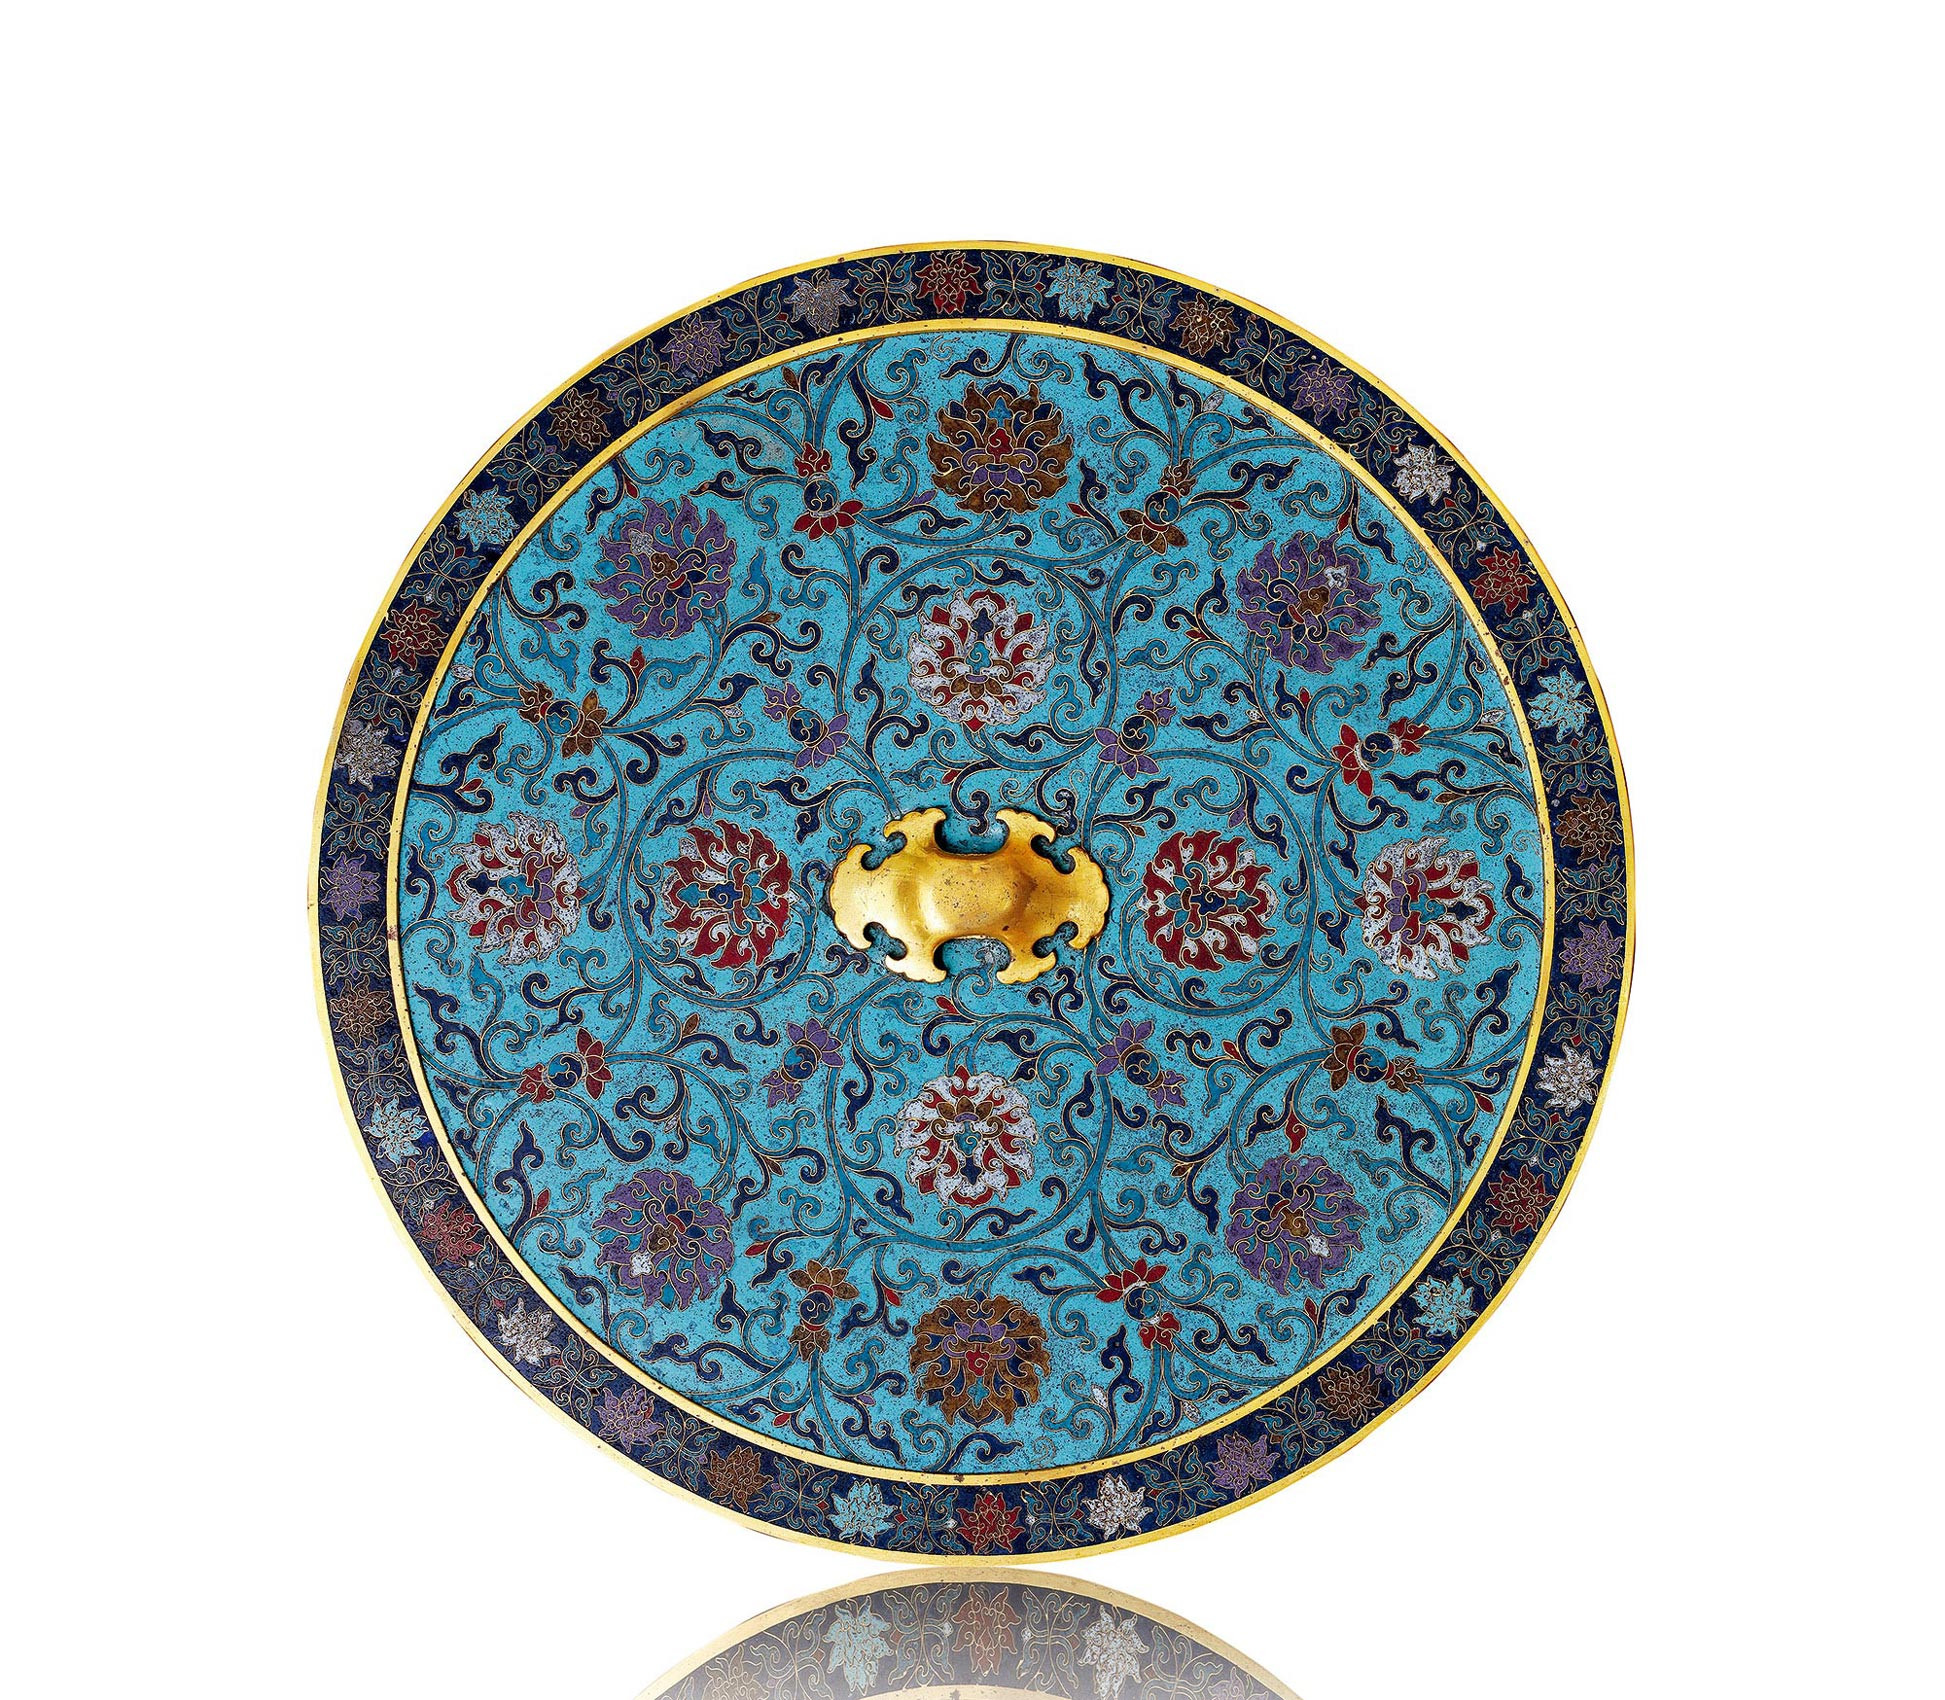 AN IMPERIAL AND MAGNIFICENT CLOISONNE ENAMEL ‘INTERLOCKING LOTUS’ MIRROR